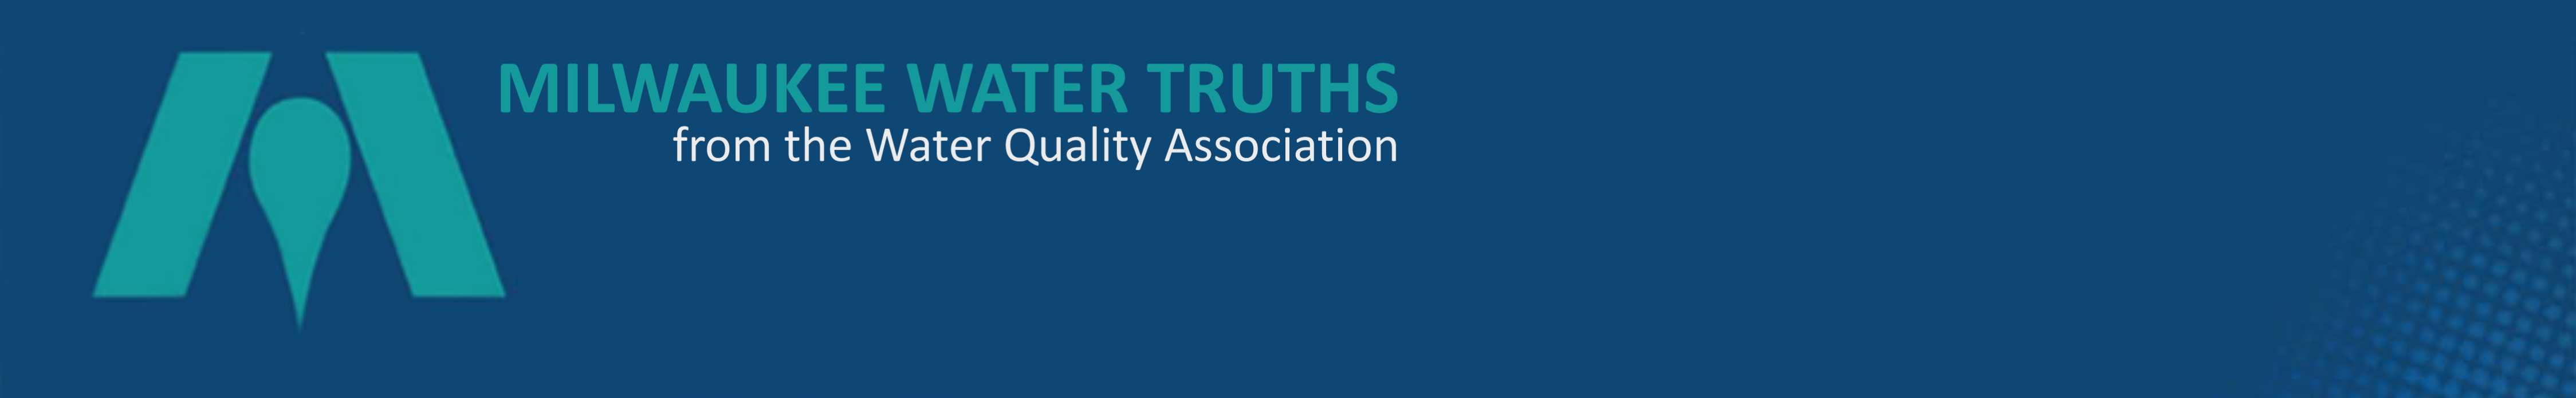 Dark blue banner that says Milwaukee Water Truths, from the Water Quality Association